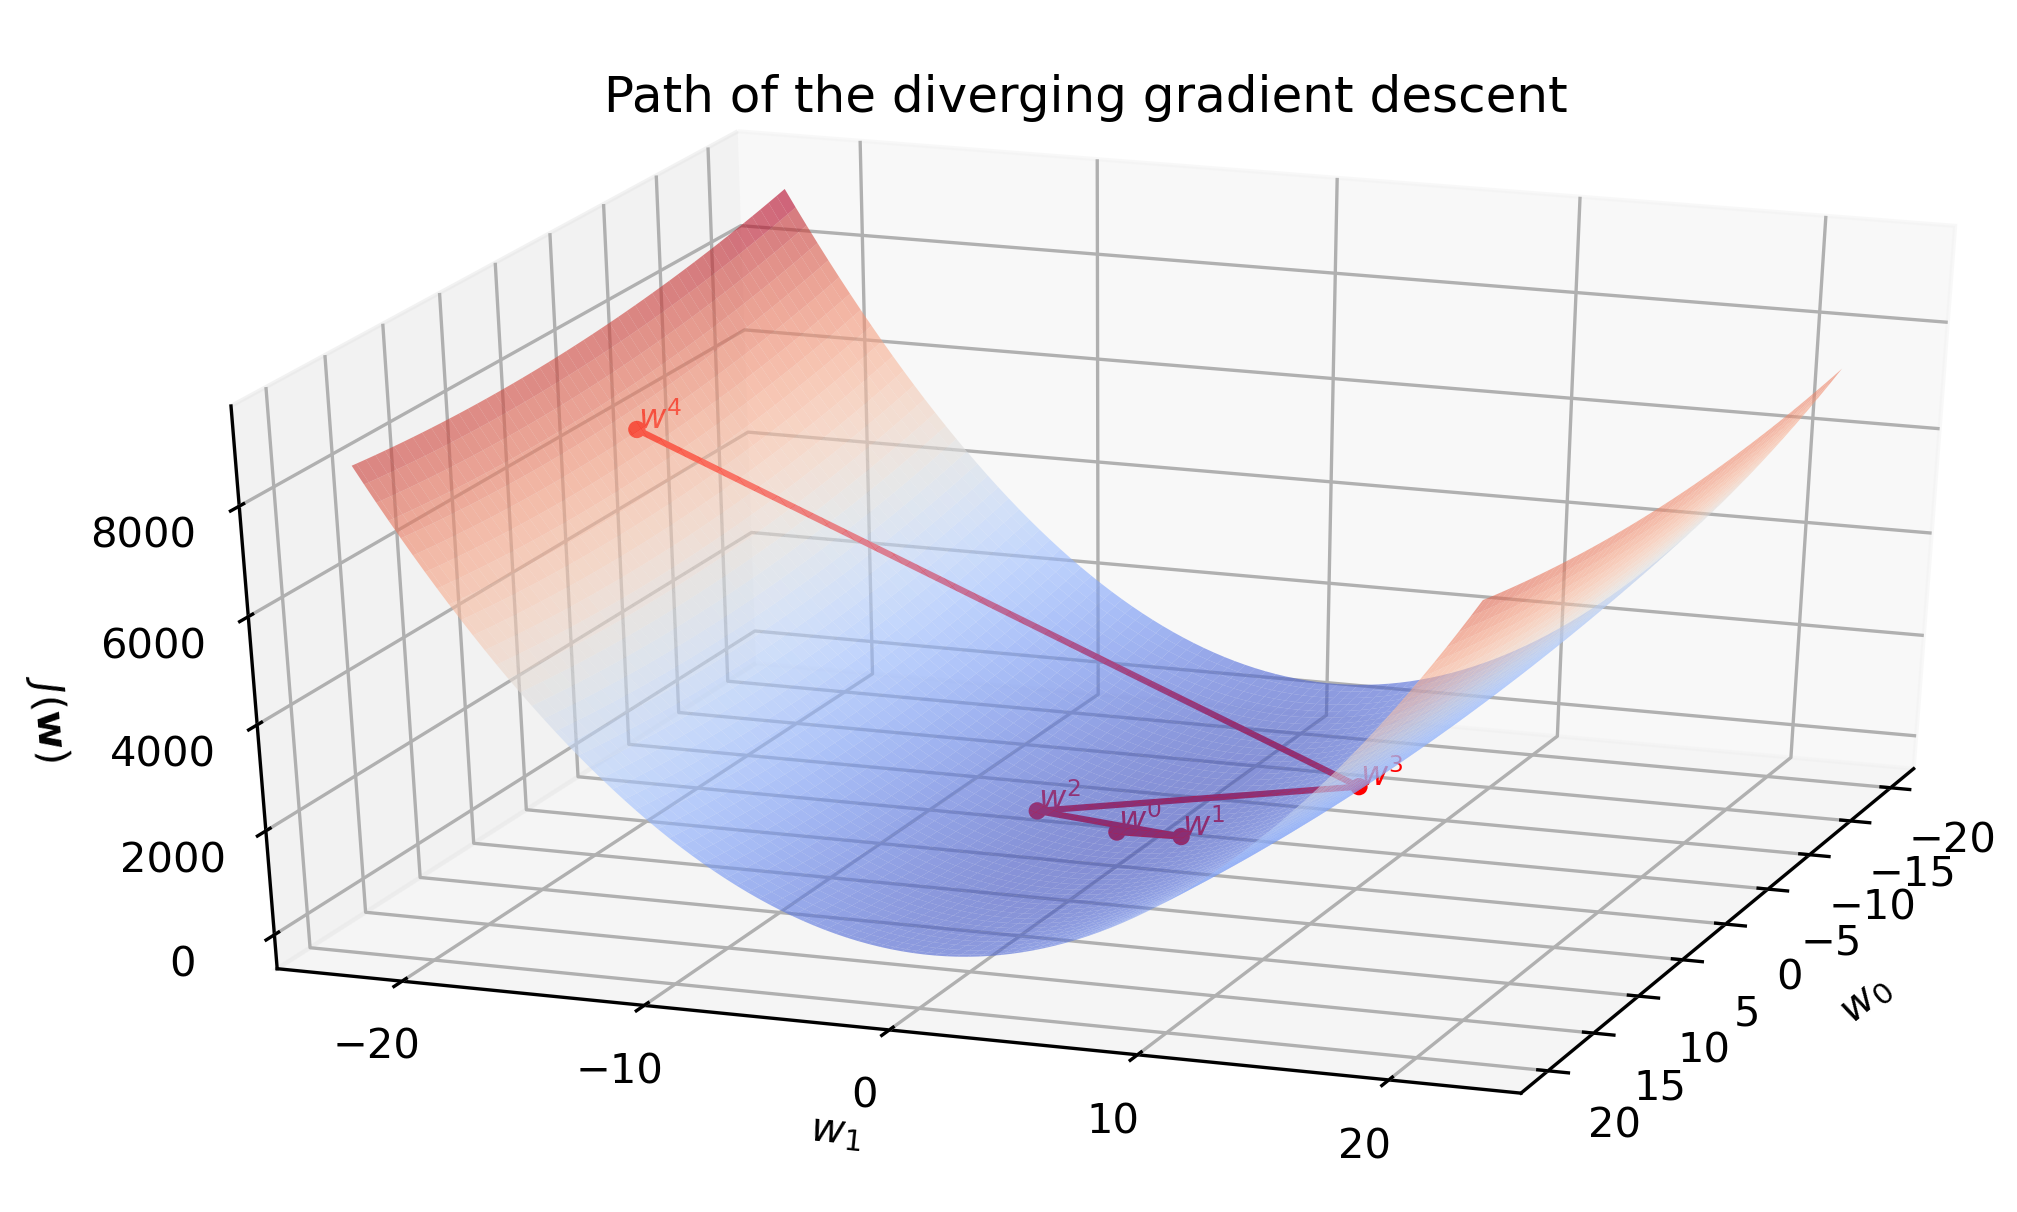 Lecture 8: Gradient Descent (and Beyond)